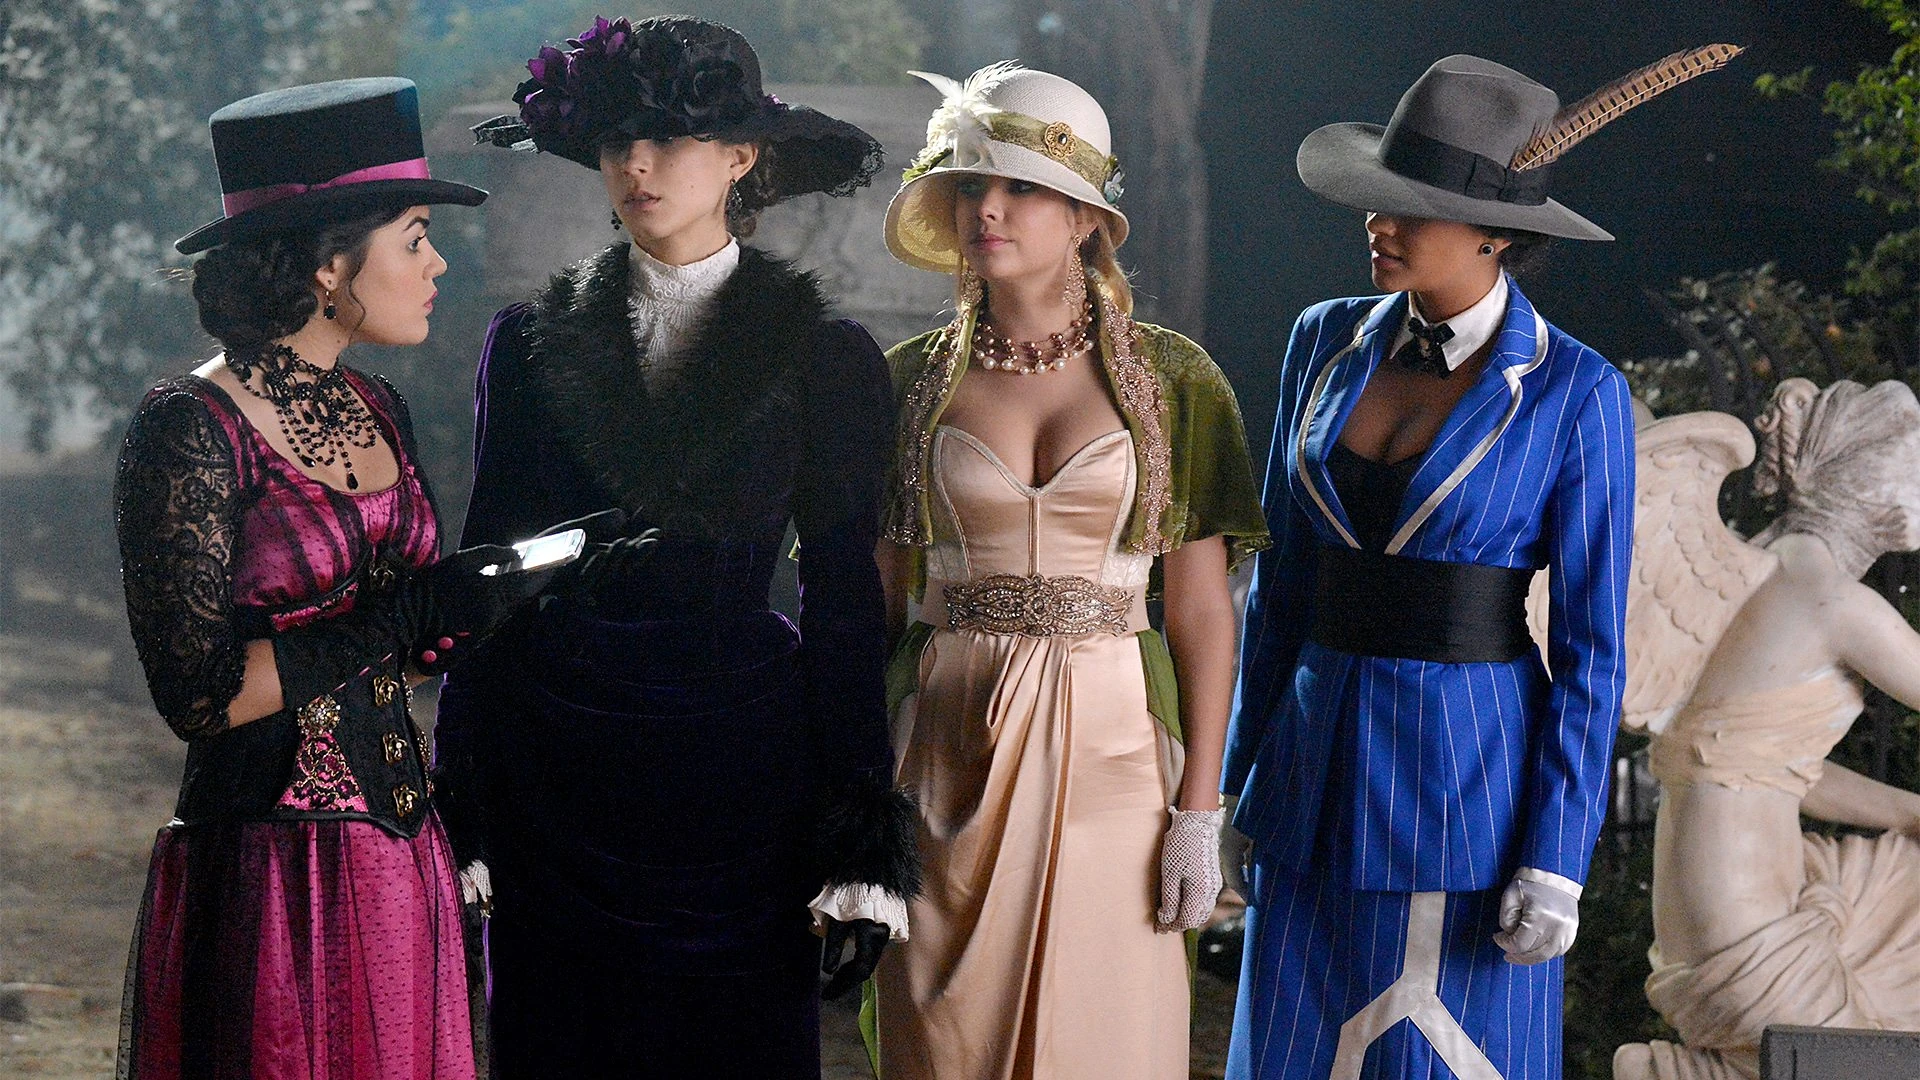 The girls from Pretty little Liars are dressed in costume on Halloween in season 4, episode 13.